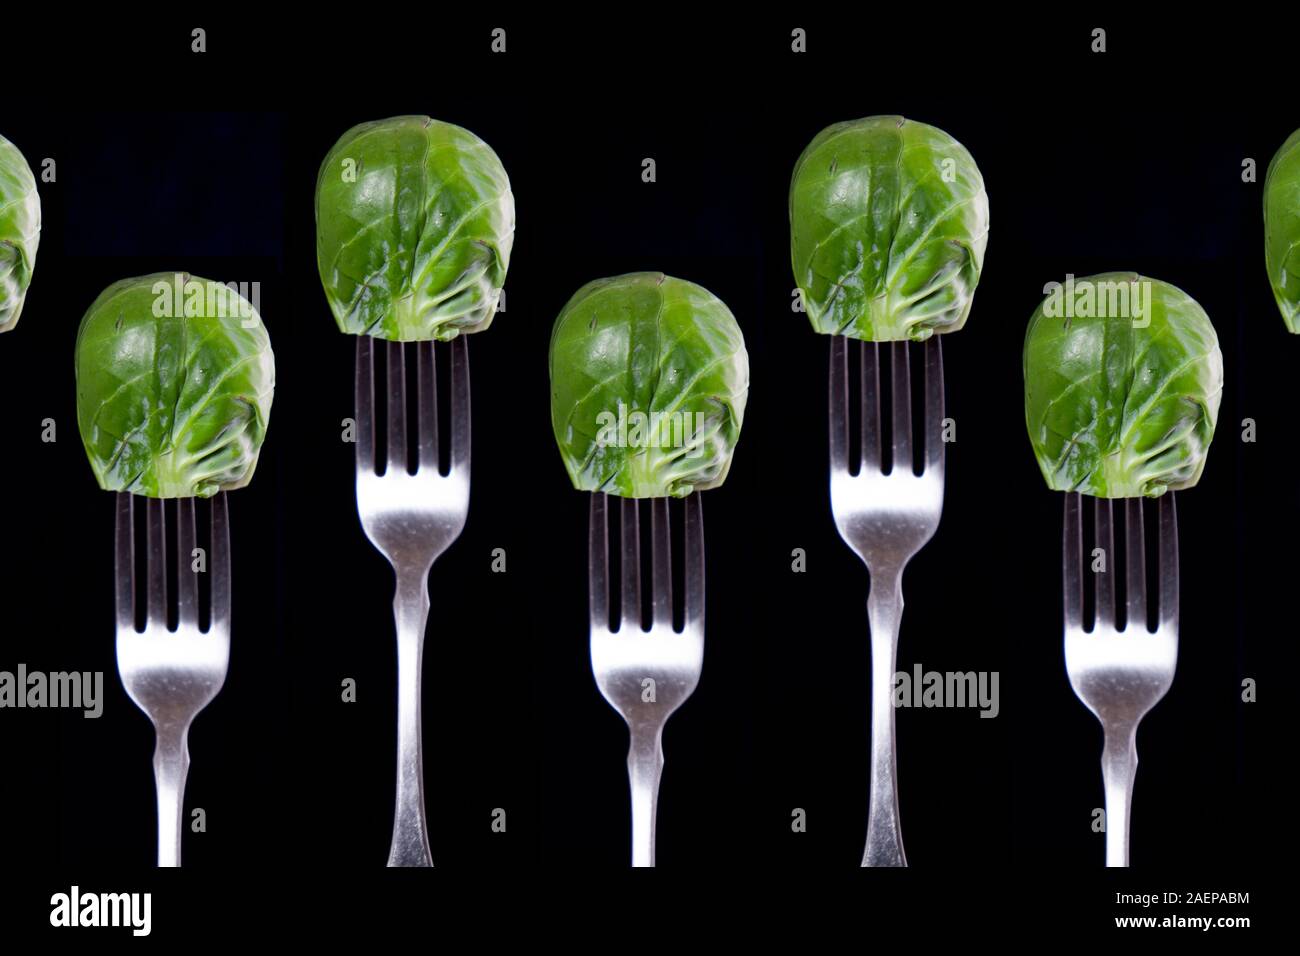 Brussels sprouts on forks.  Eat up and get all your nutrients! Stock Photo